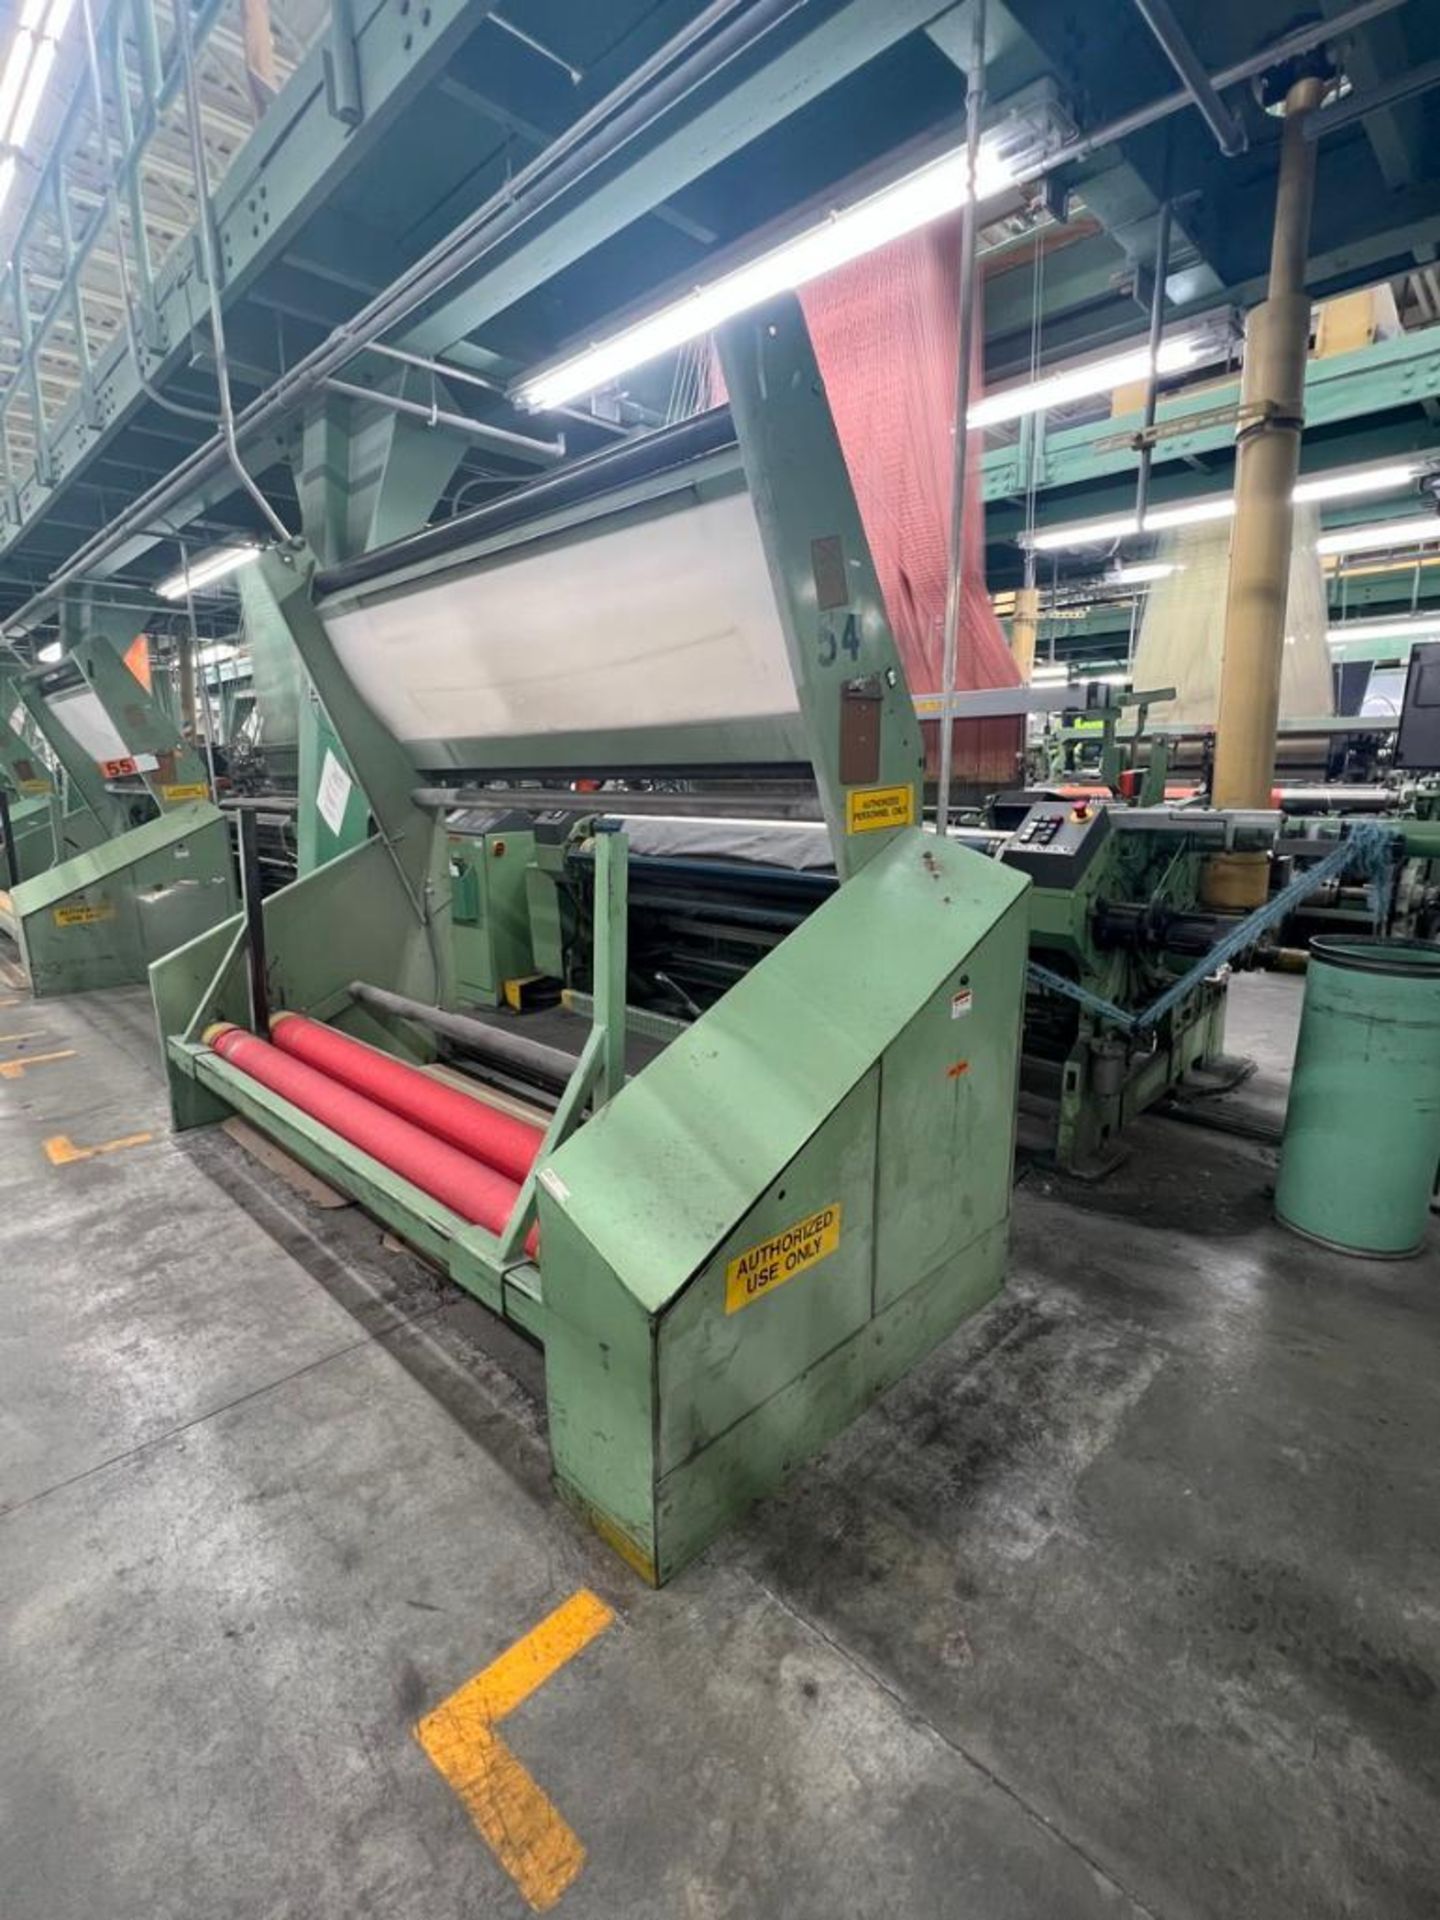 1997 Dornier 210 cm Jacquard Rapier Loom, Model HTVS 8/J, S/N 38461 - Equipped with 6 Colors, 4 Feed - Image 10 of 13